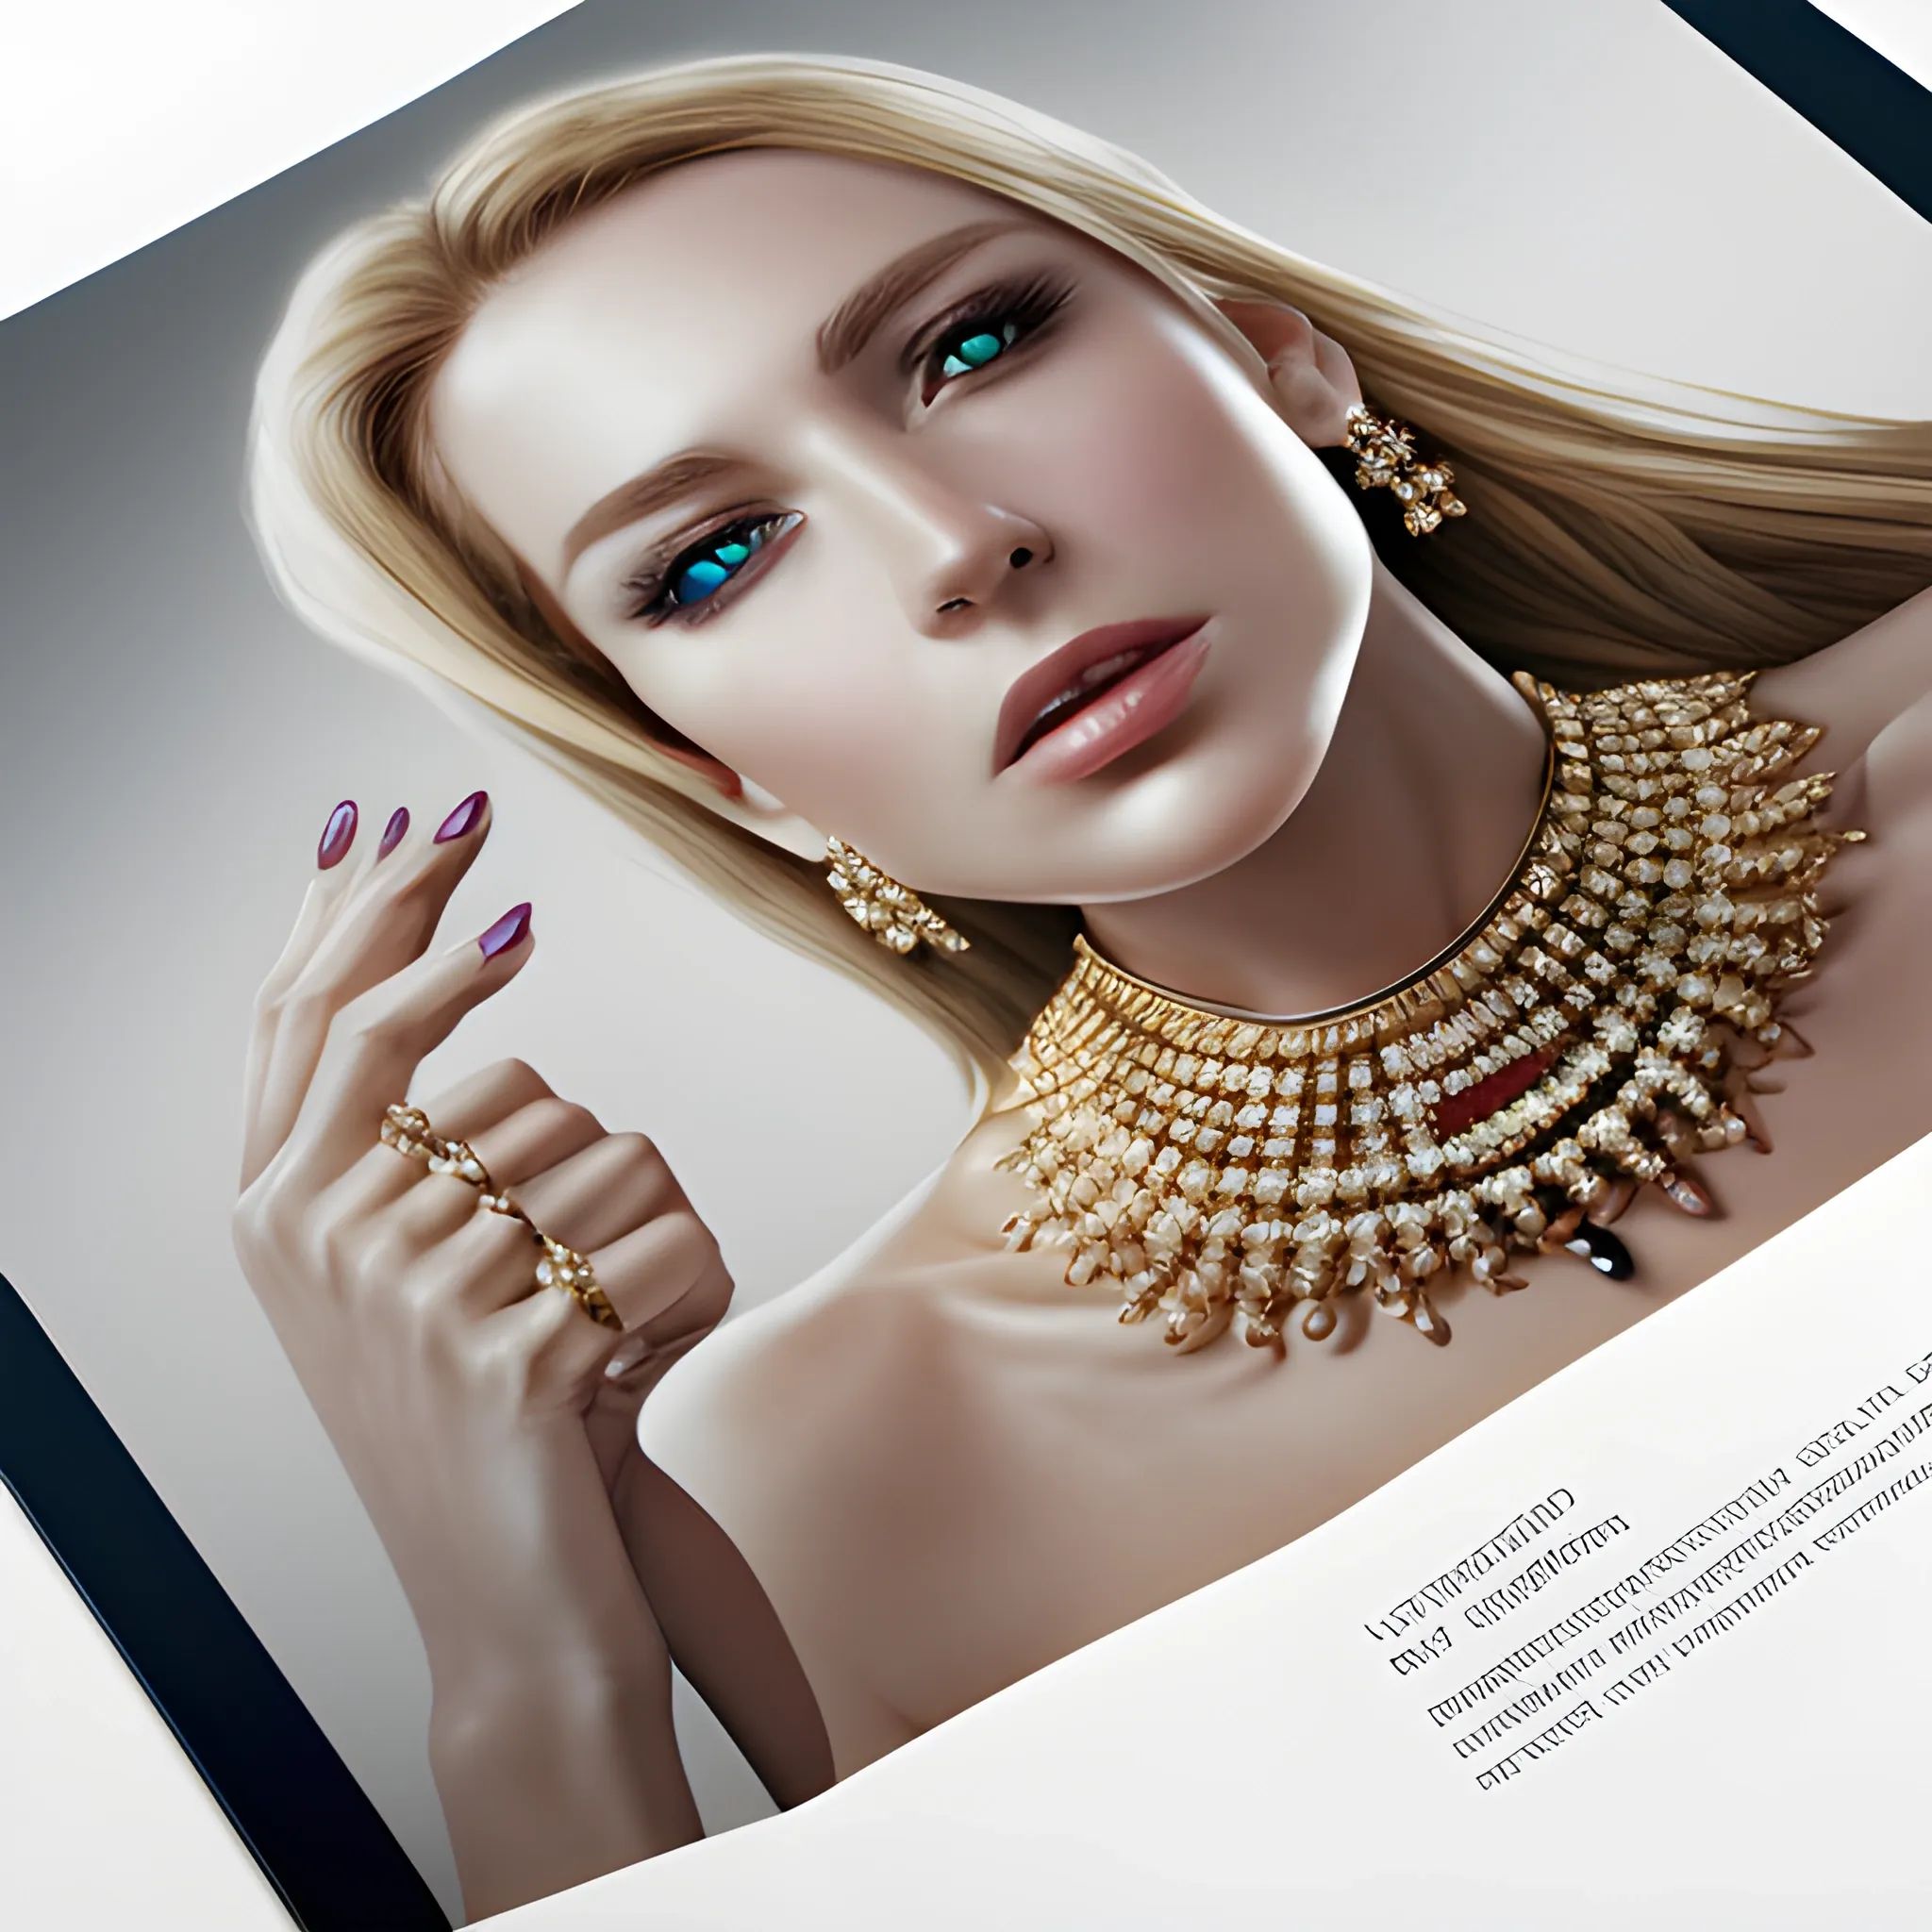 A reference. Advertising of jewelry. The designer's portfolio. Photorealism